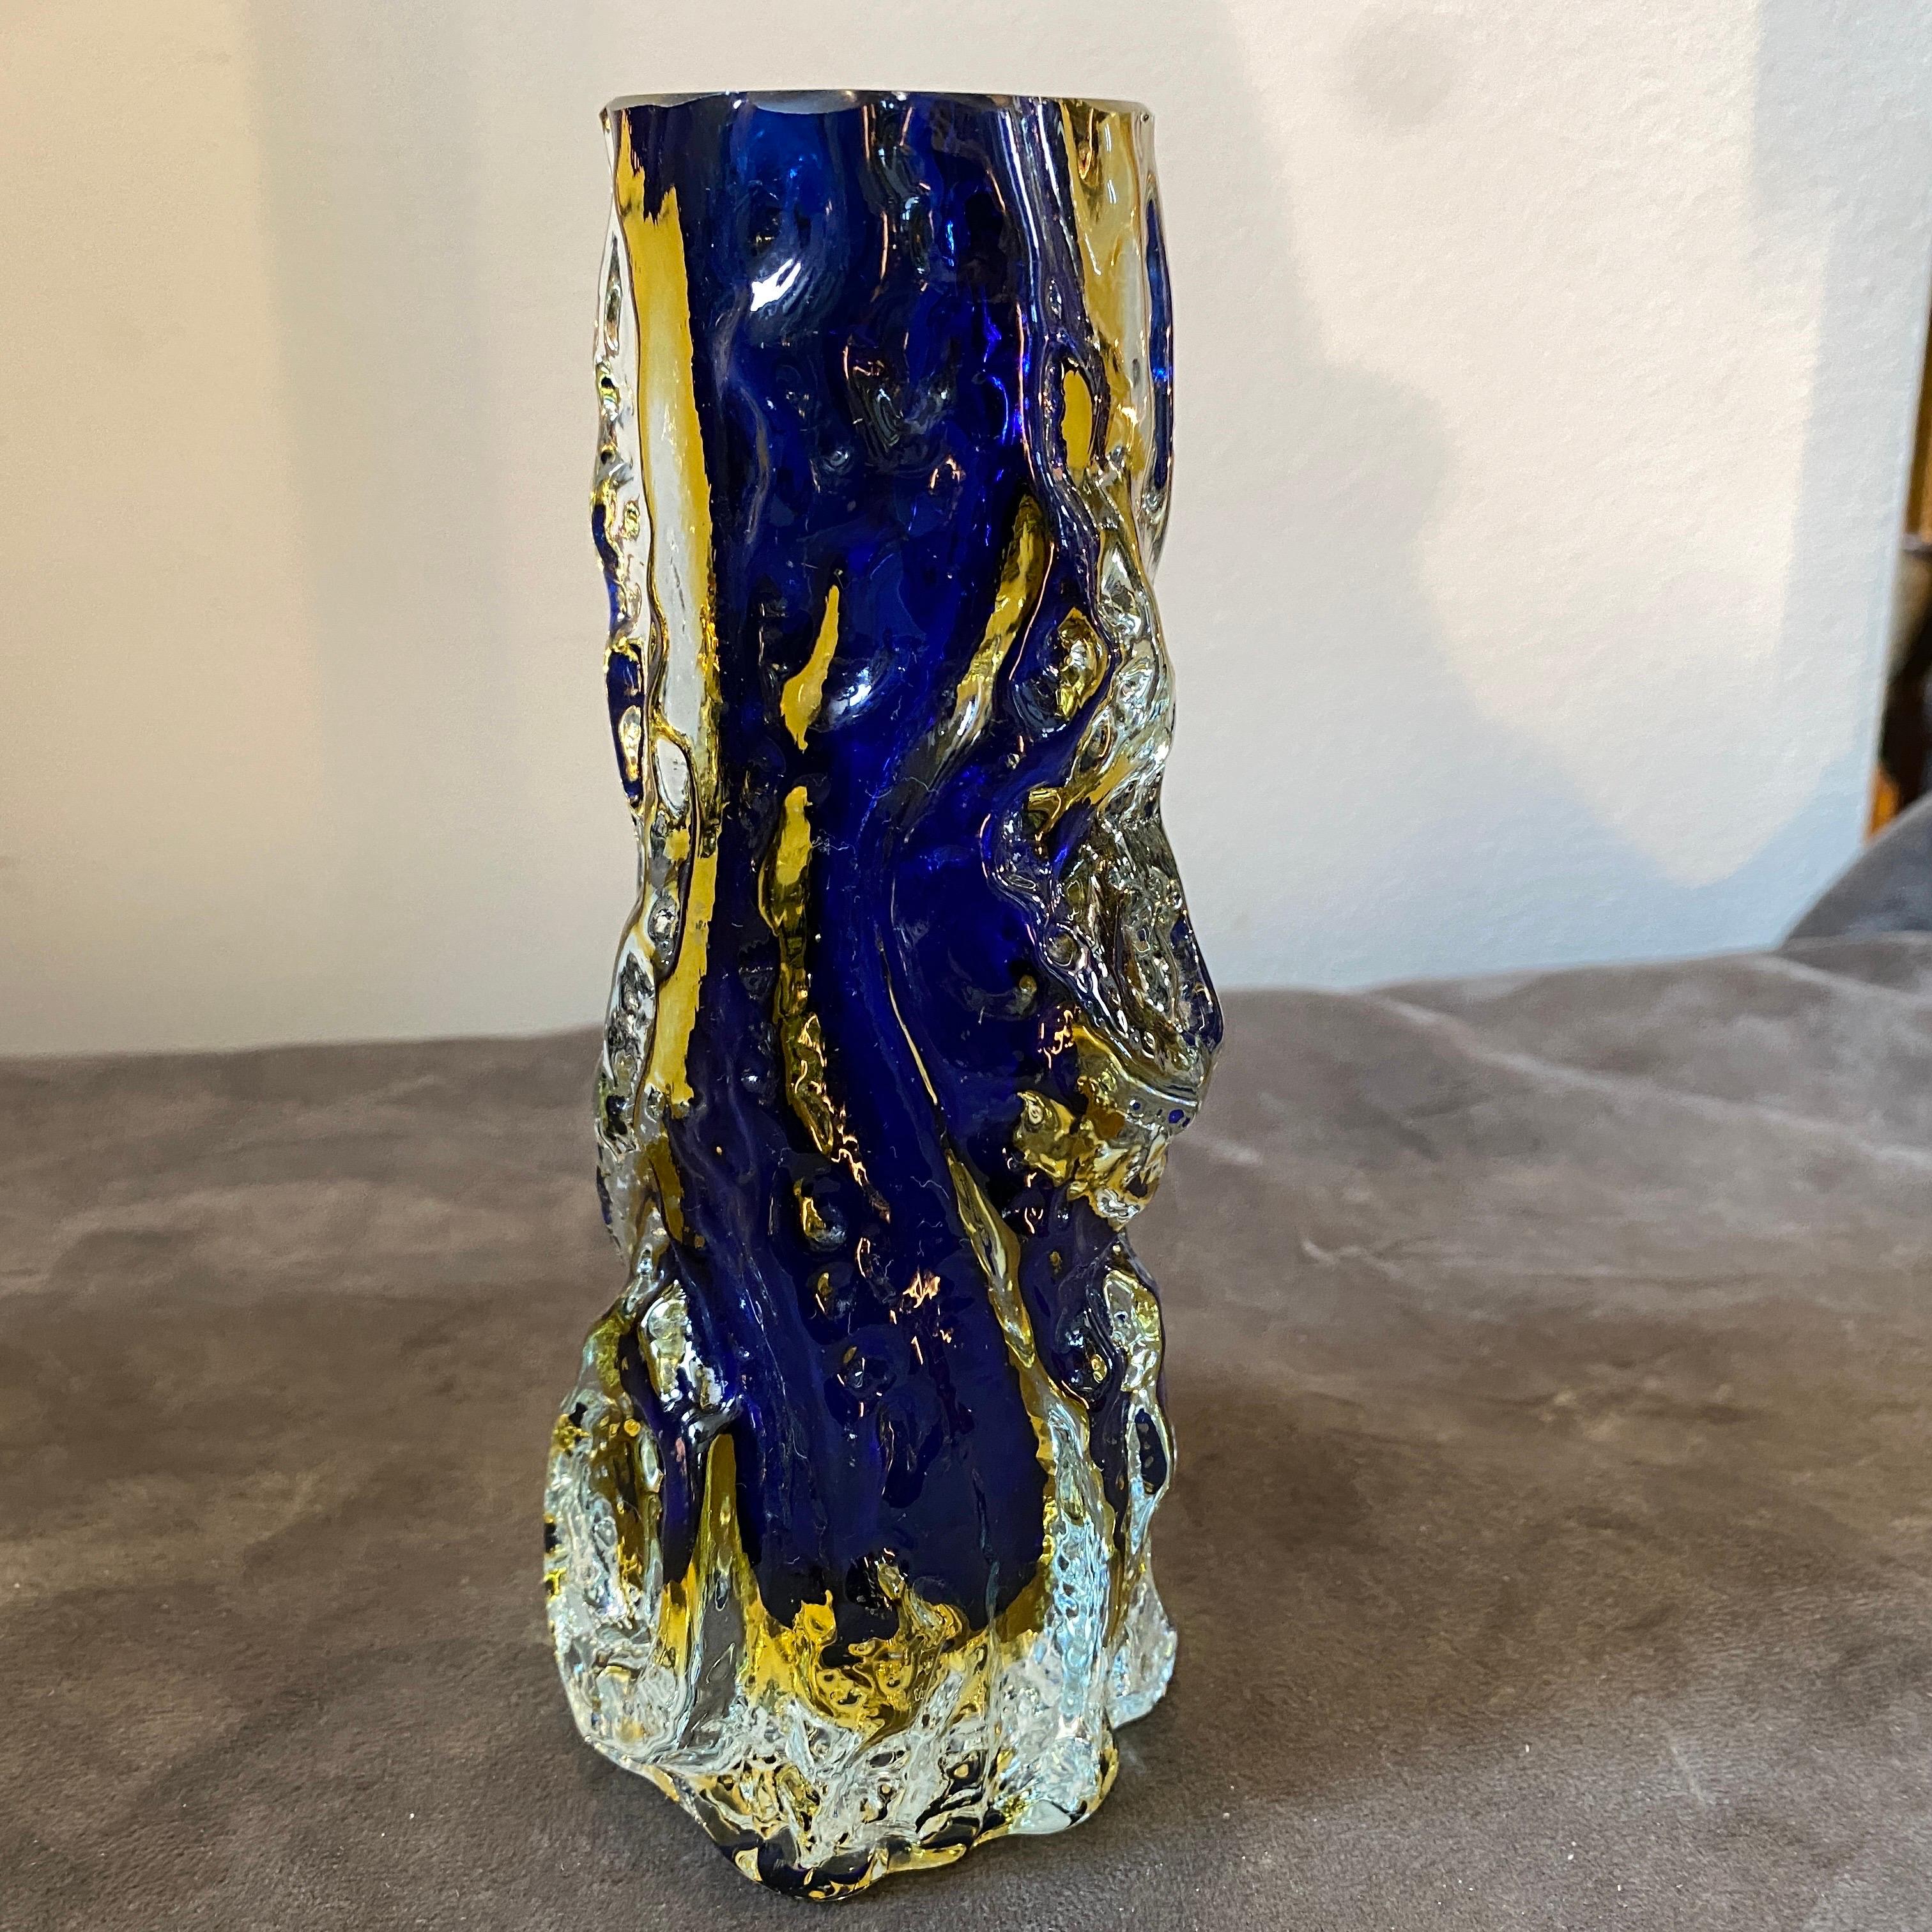 1970s Blue and Yellow Sommerso Murano Glass Vase by Mandruzzato 1